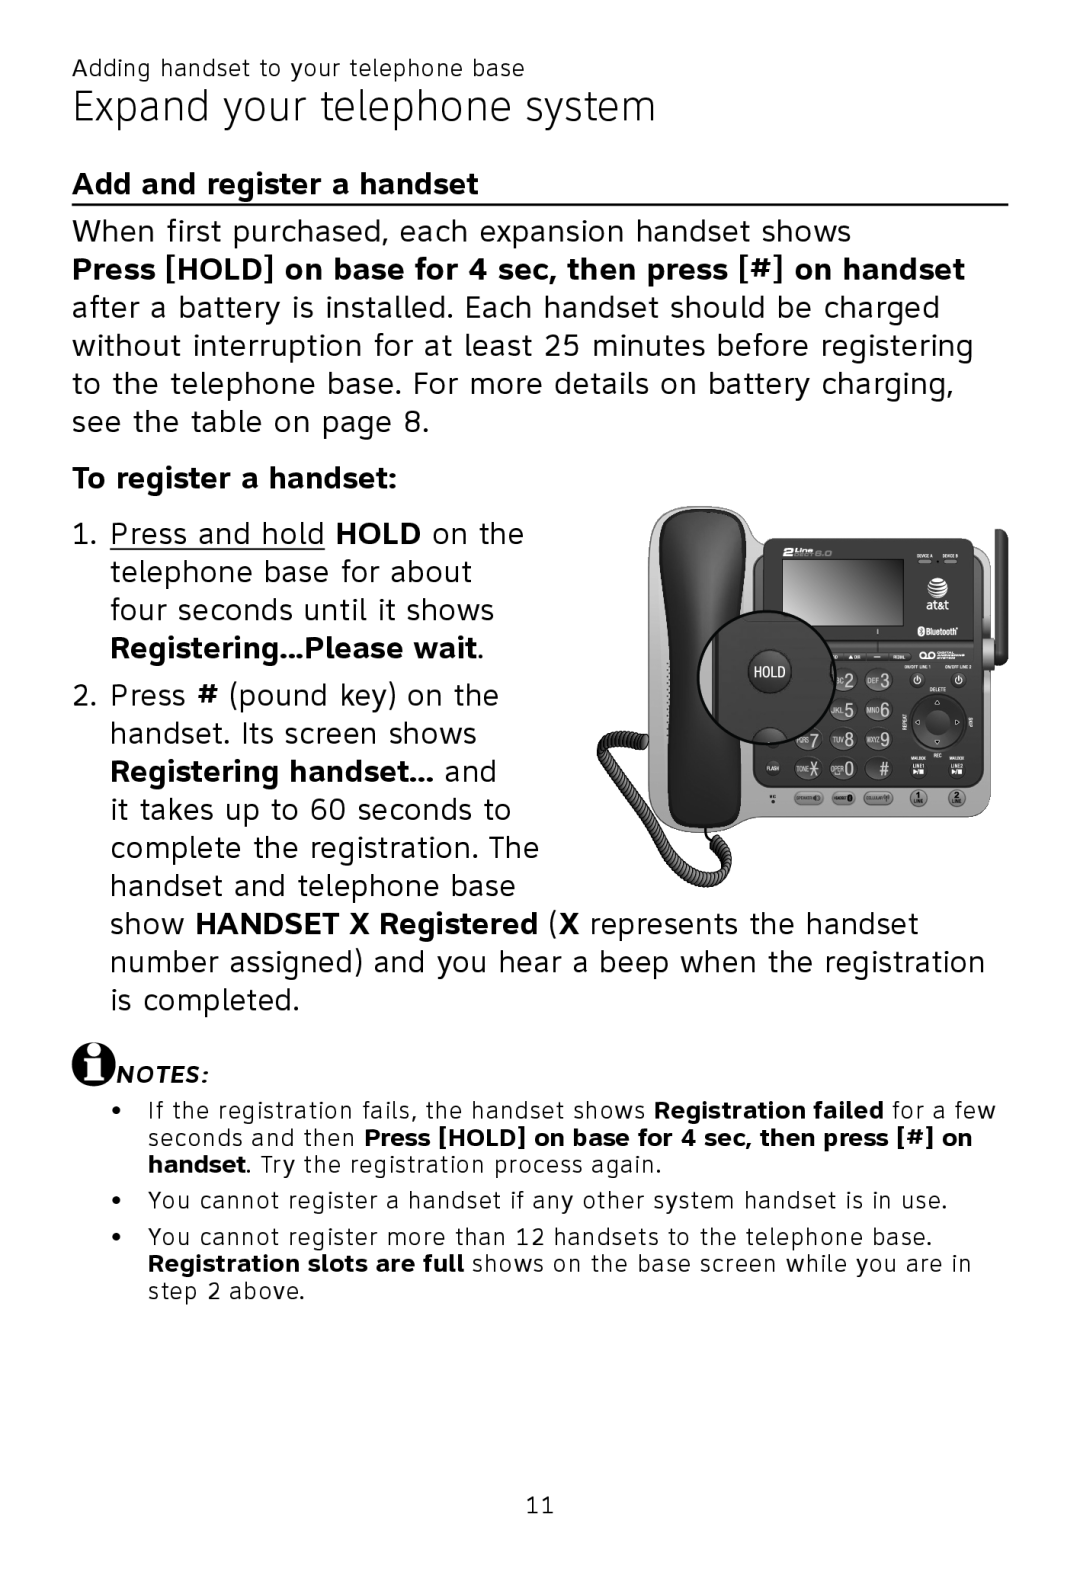 AT&T TL86109, TL86009, TL 86009 user manual Expand your telephone system, Add and register a handset, To register a handset 